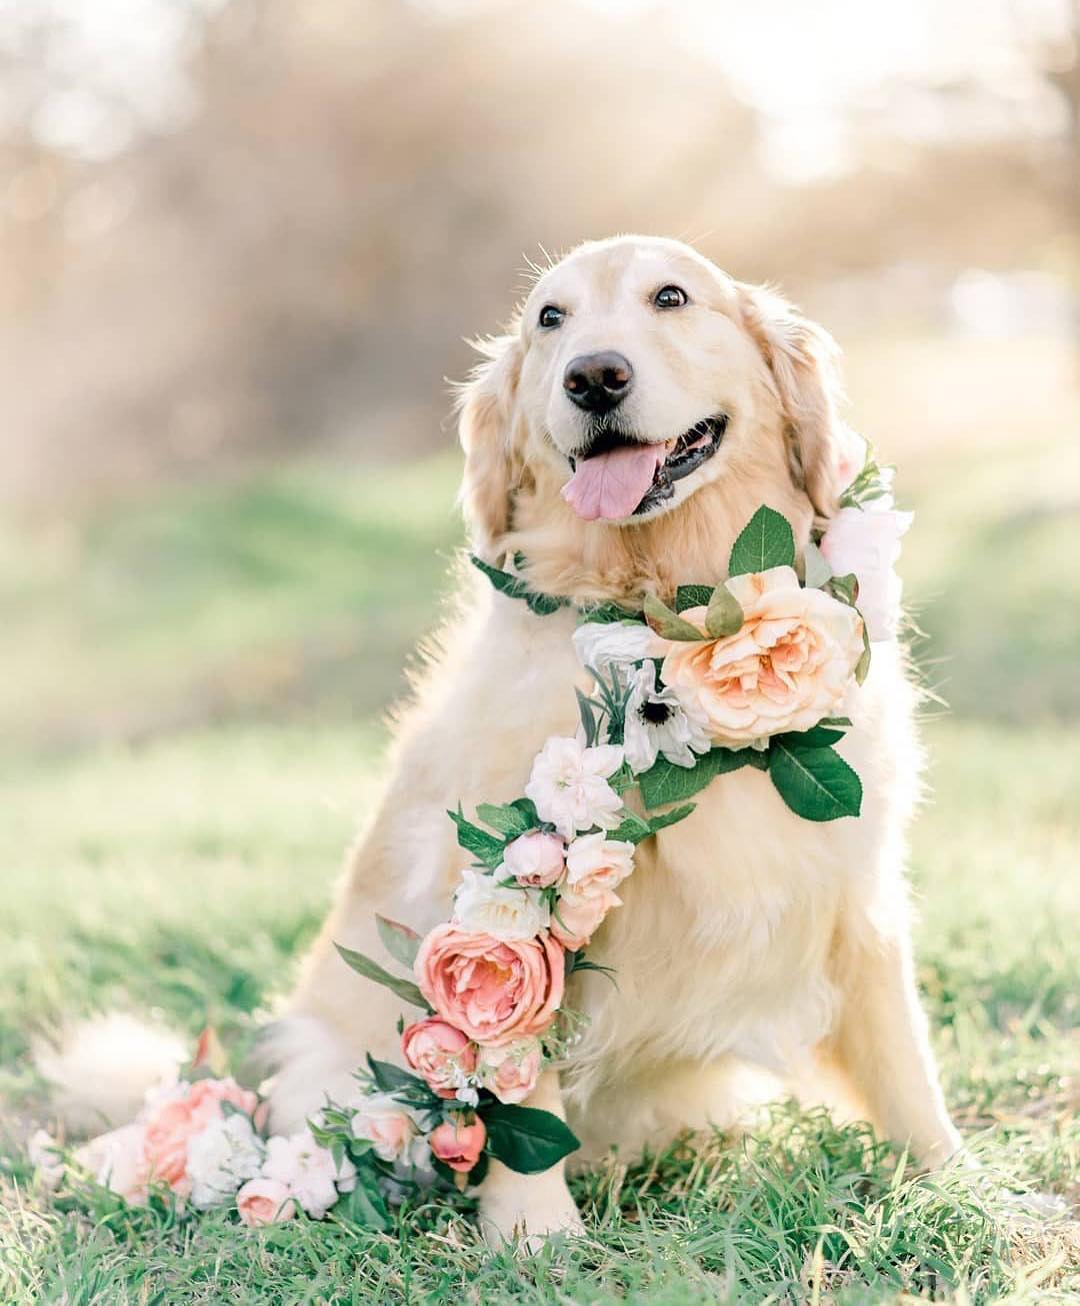 WARNING: These ridiculously cute pictures of dogs in weddings will make your day much better. // Loving how this labrador is dressed up with a floral collar. // mysweetengagement.com